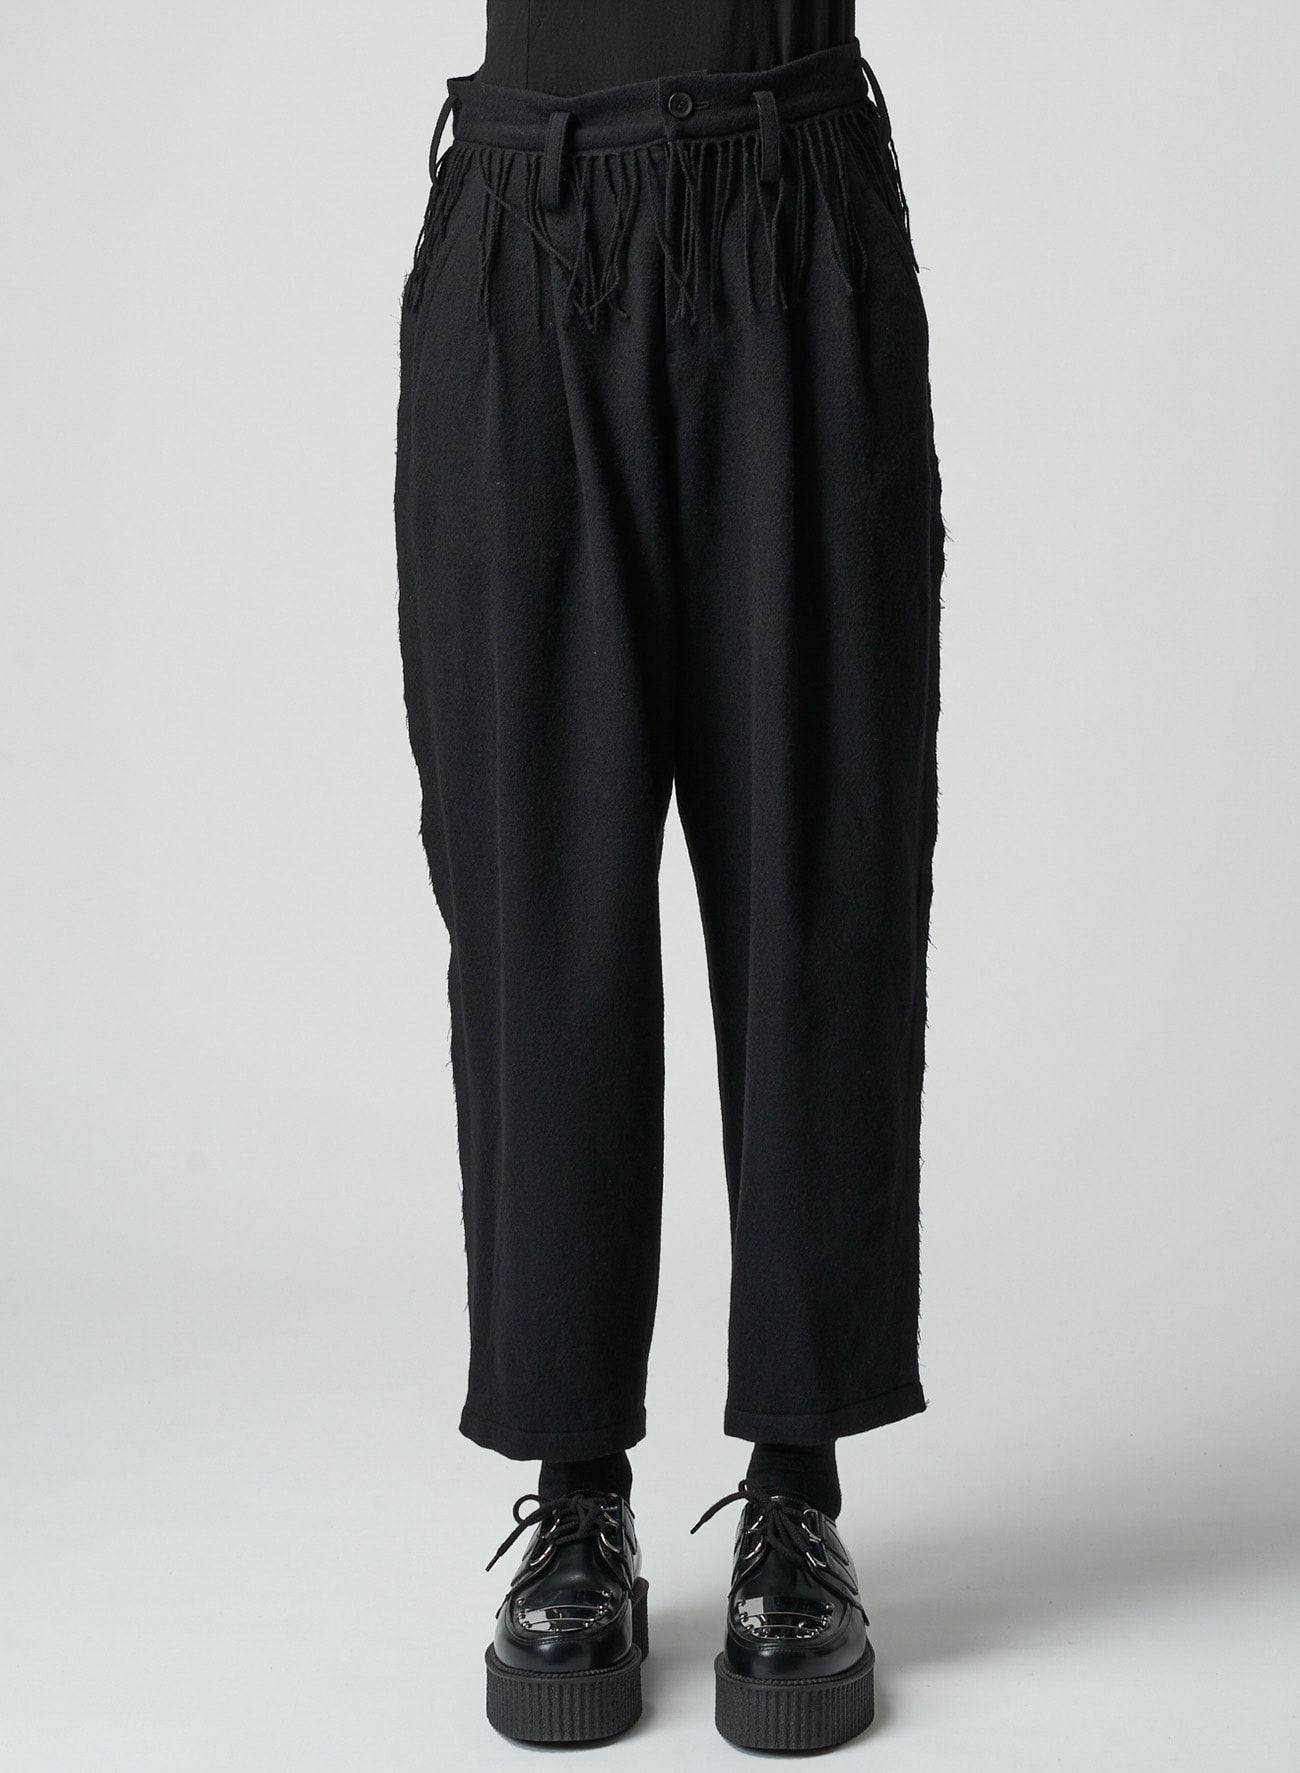 PLEATED SERGE PANTS WITH FRINGE DETAILS